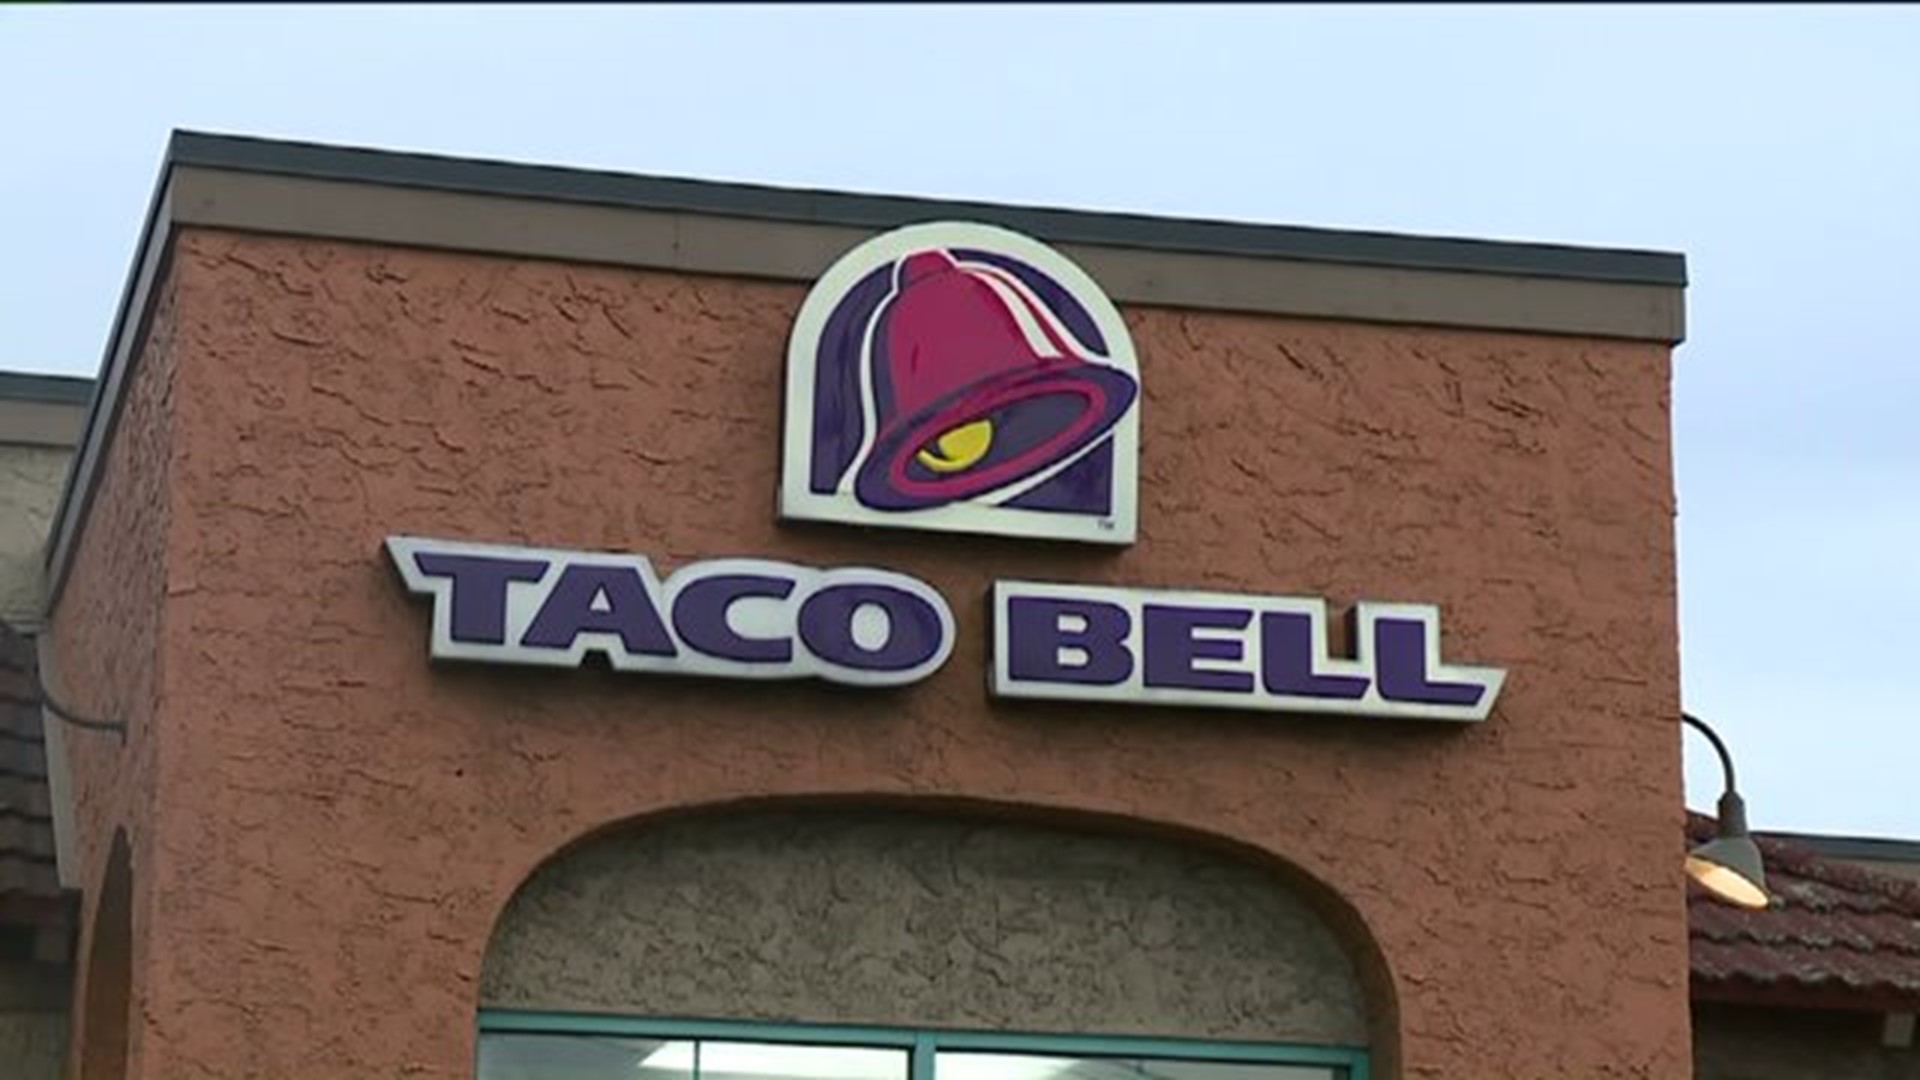 Police: Taco Bell Worker 'Skimmed' Customer Credit Cards at Drive-Thru